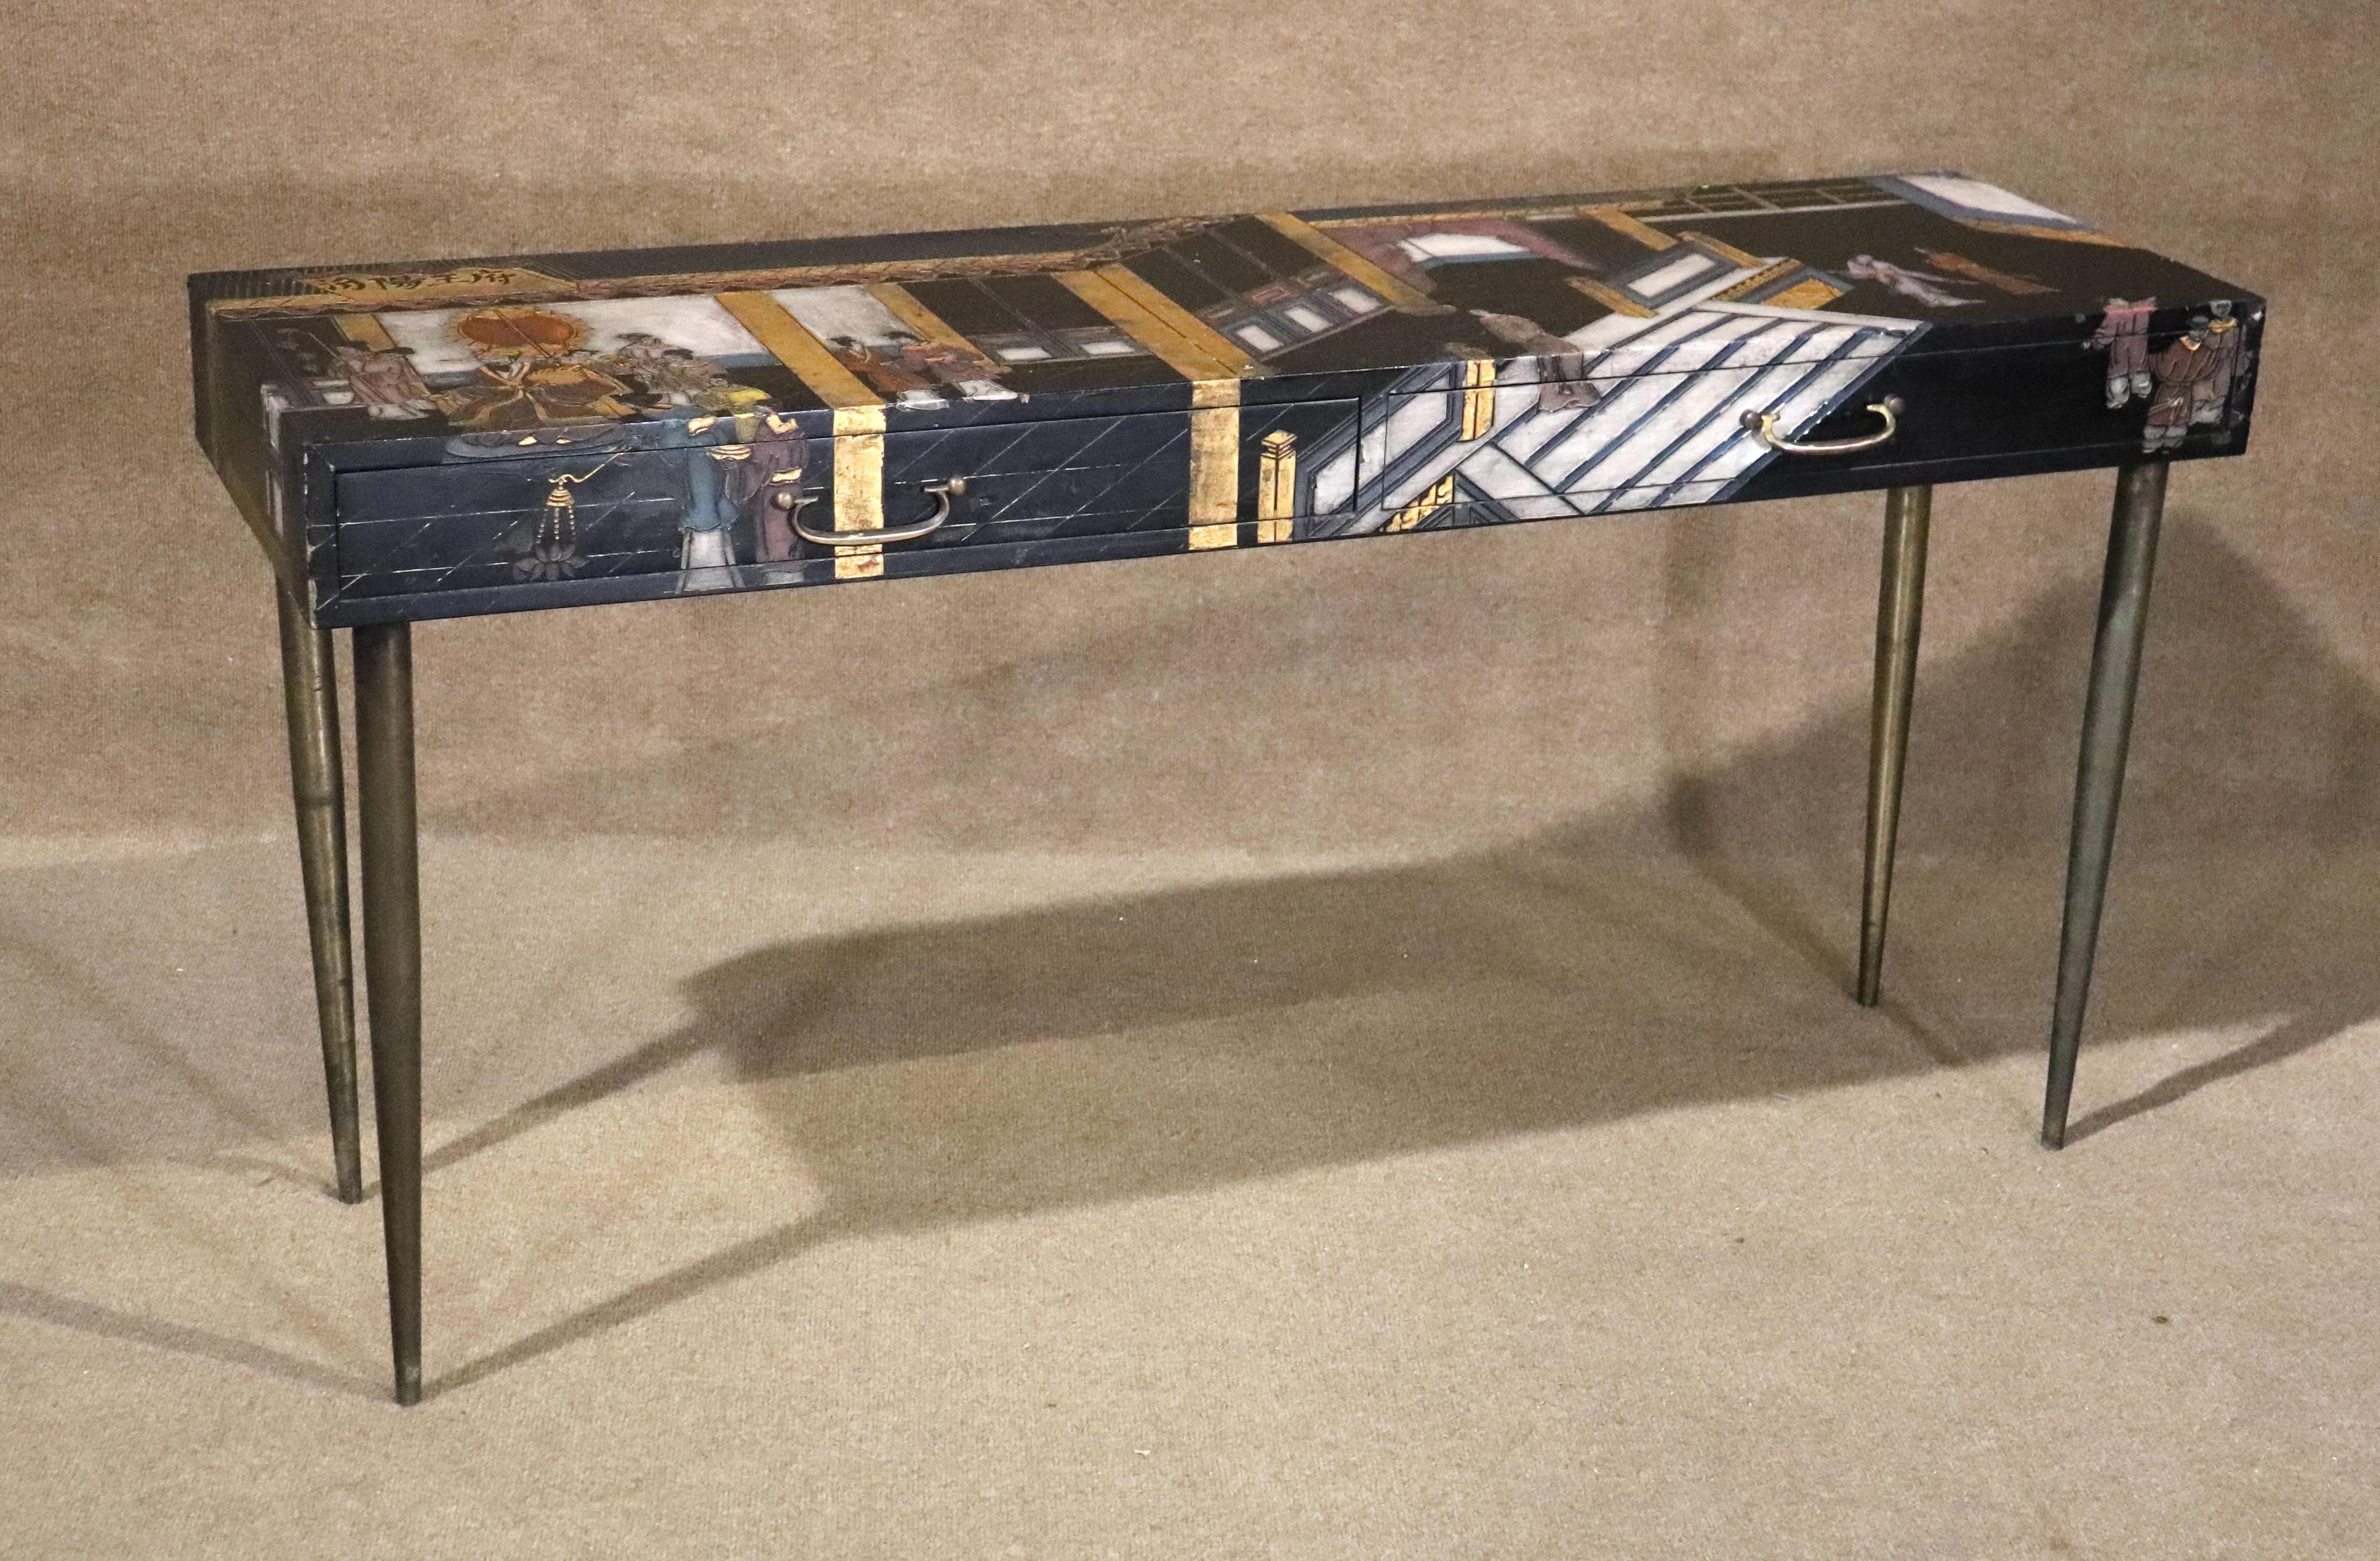 Long lacquered table with etched Asian motif on top and sides. Beautiful imagery and decoration. Set on long brass legs.
Please confirm location NY or NJ